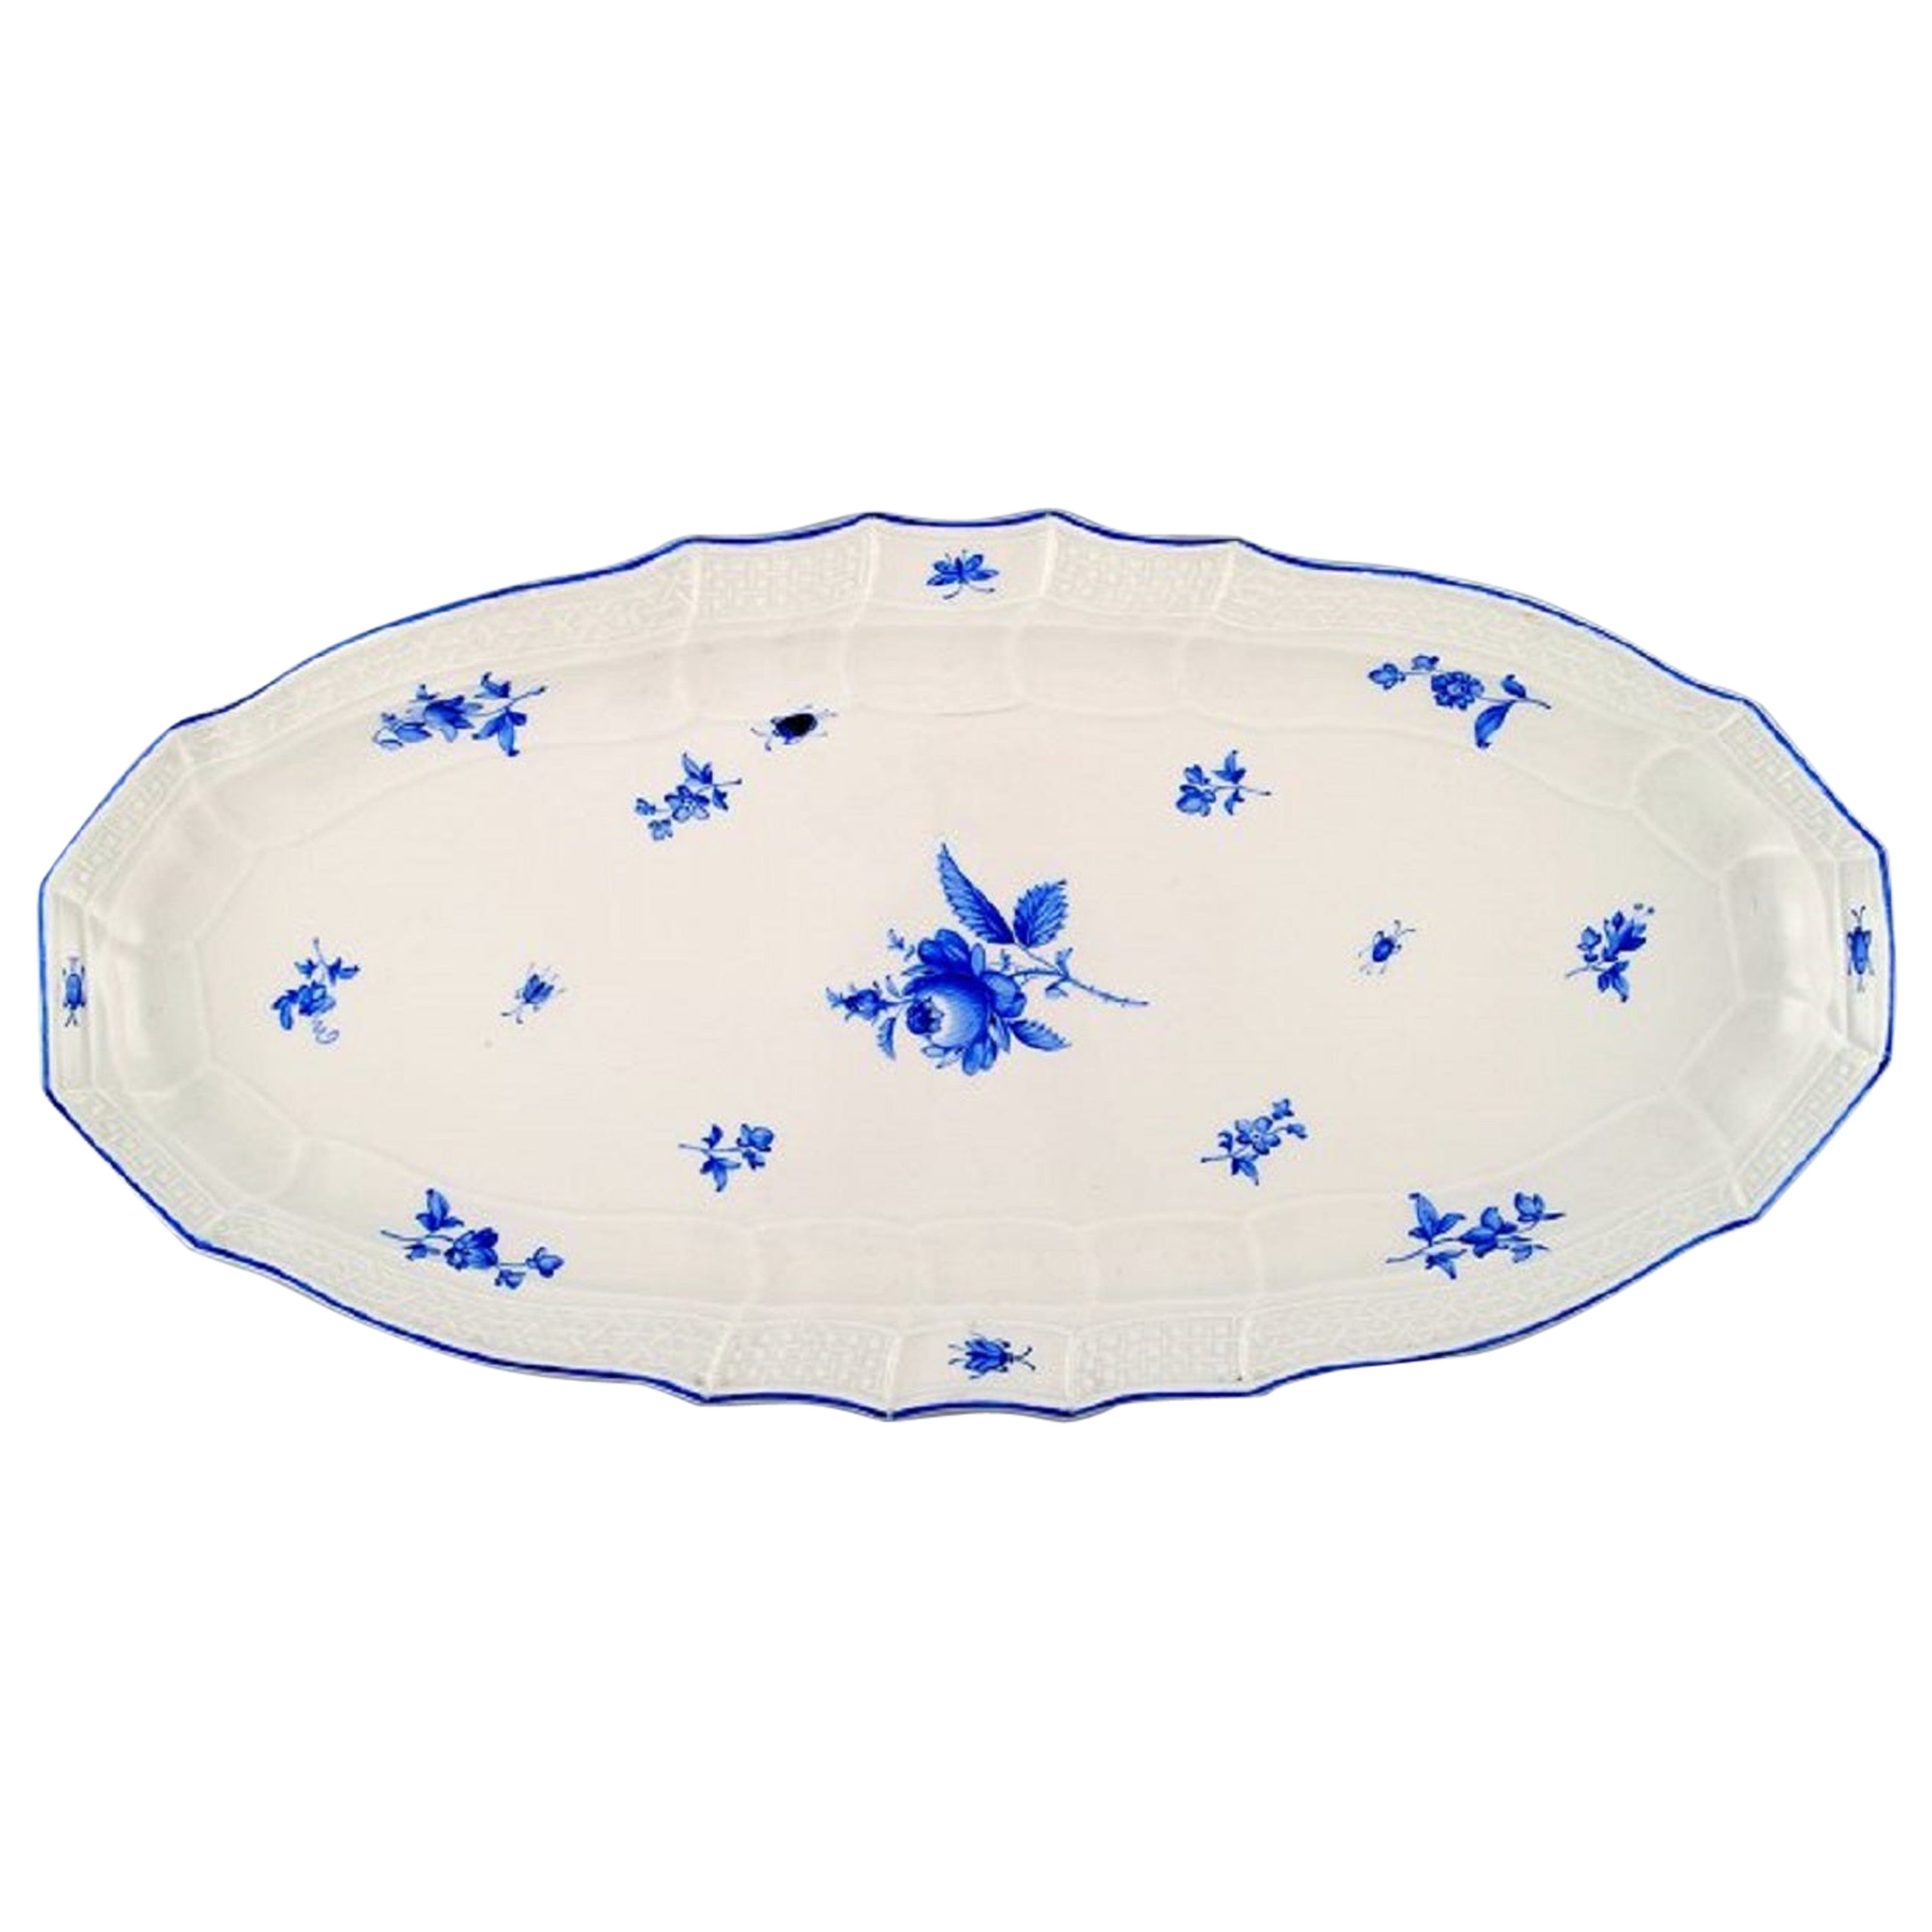 Meissen Large Fish Dish in Porcelain, Hand Painted with Blue Roses and Beetles